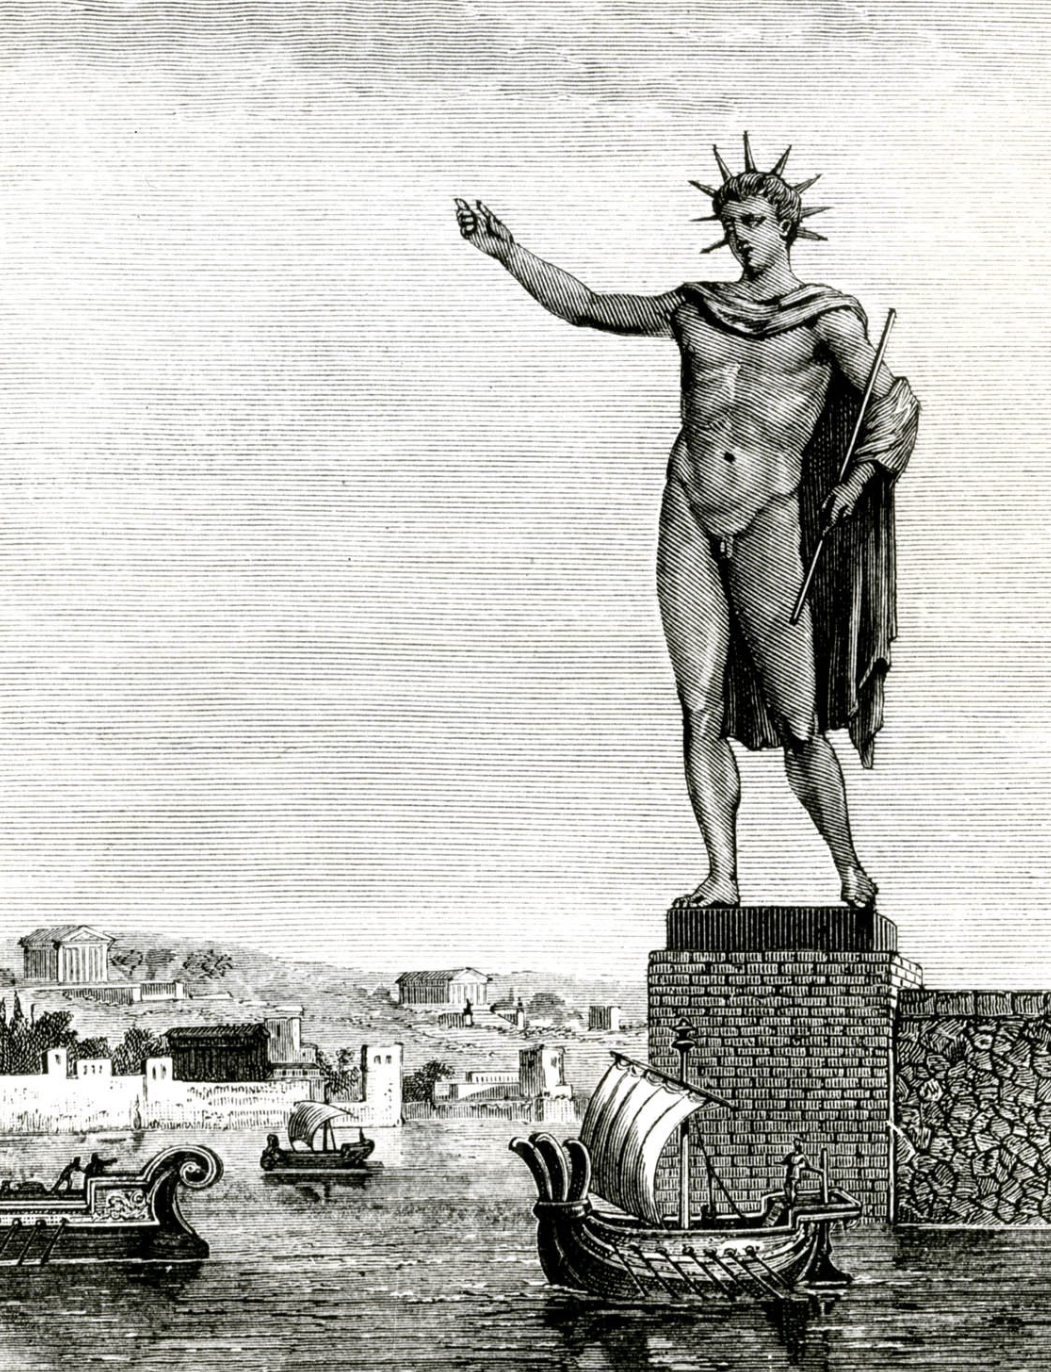 Standing at roughly the height of our Statue of Liberty, the Colossus of Rhodes was one of the seven wonders of the ancient world… until an earthquake sent it tumbling to the ground in 226 B.C. Despite symbolizing the Greek island of Rhodes for only 54 years, the broken statue fragments became a monument in their own right, remaining on the ground for eight centuries to come. 